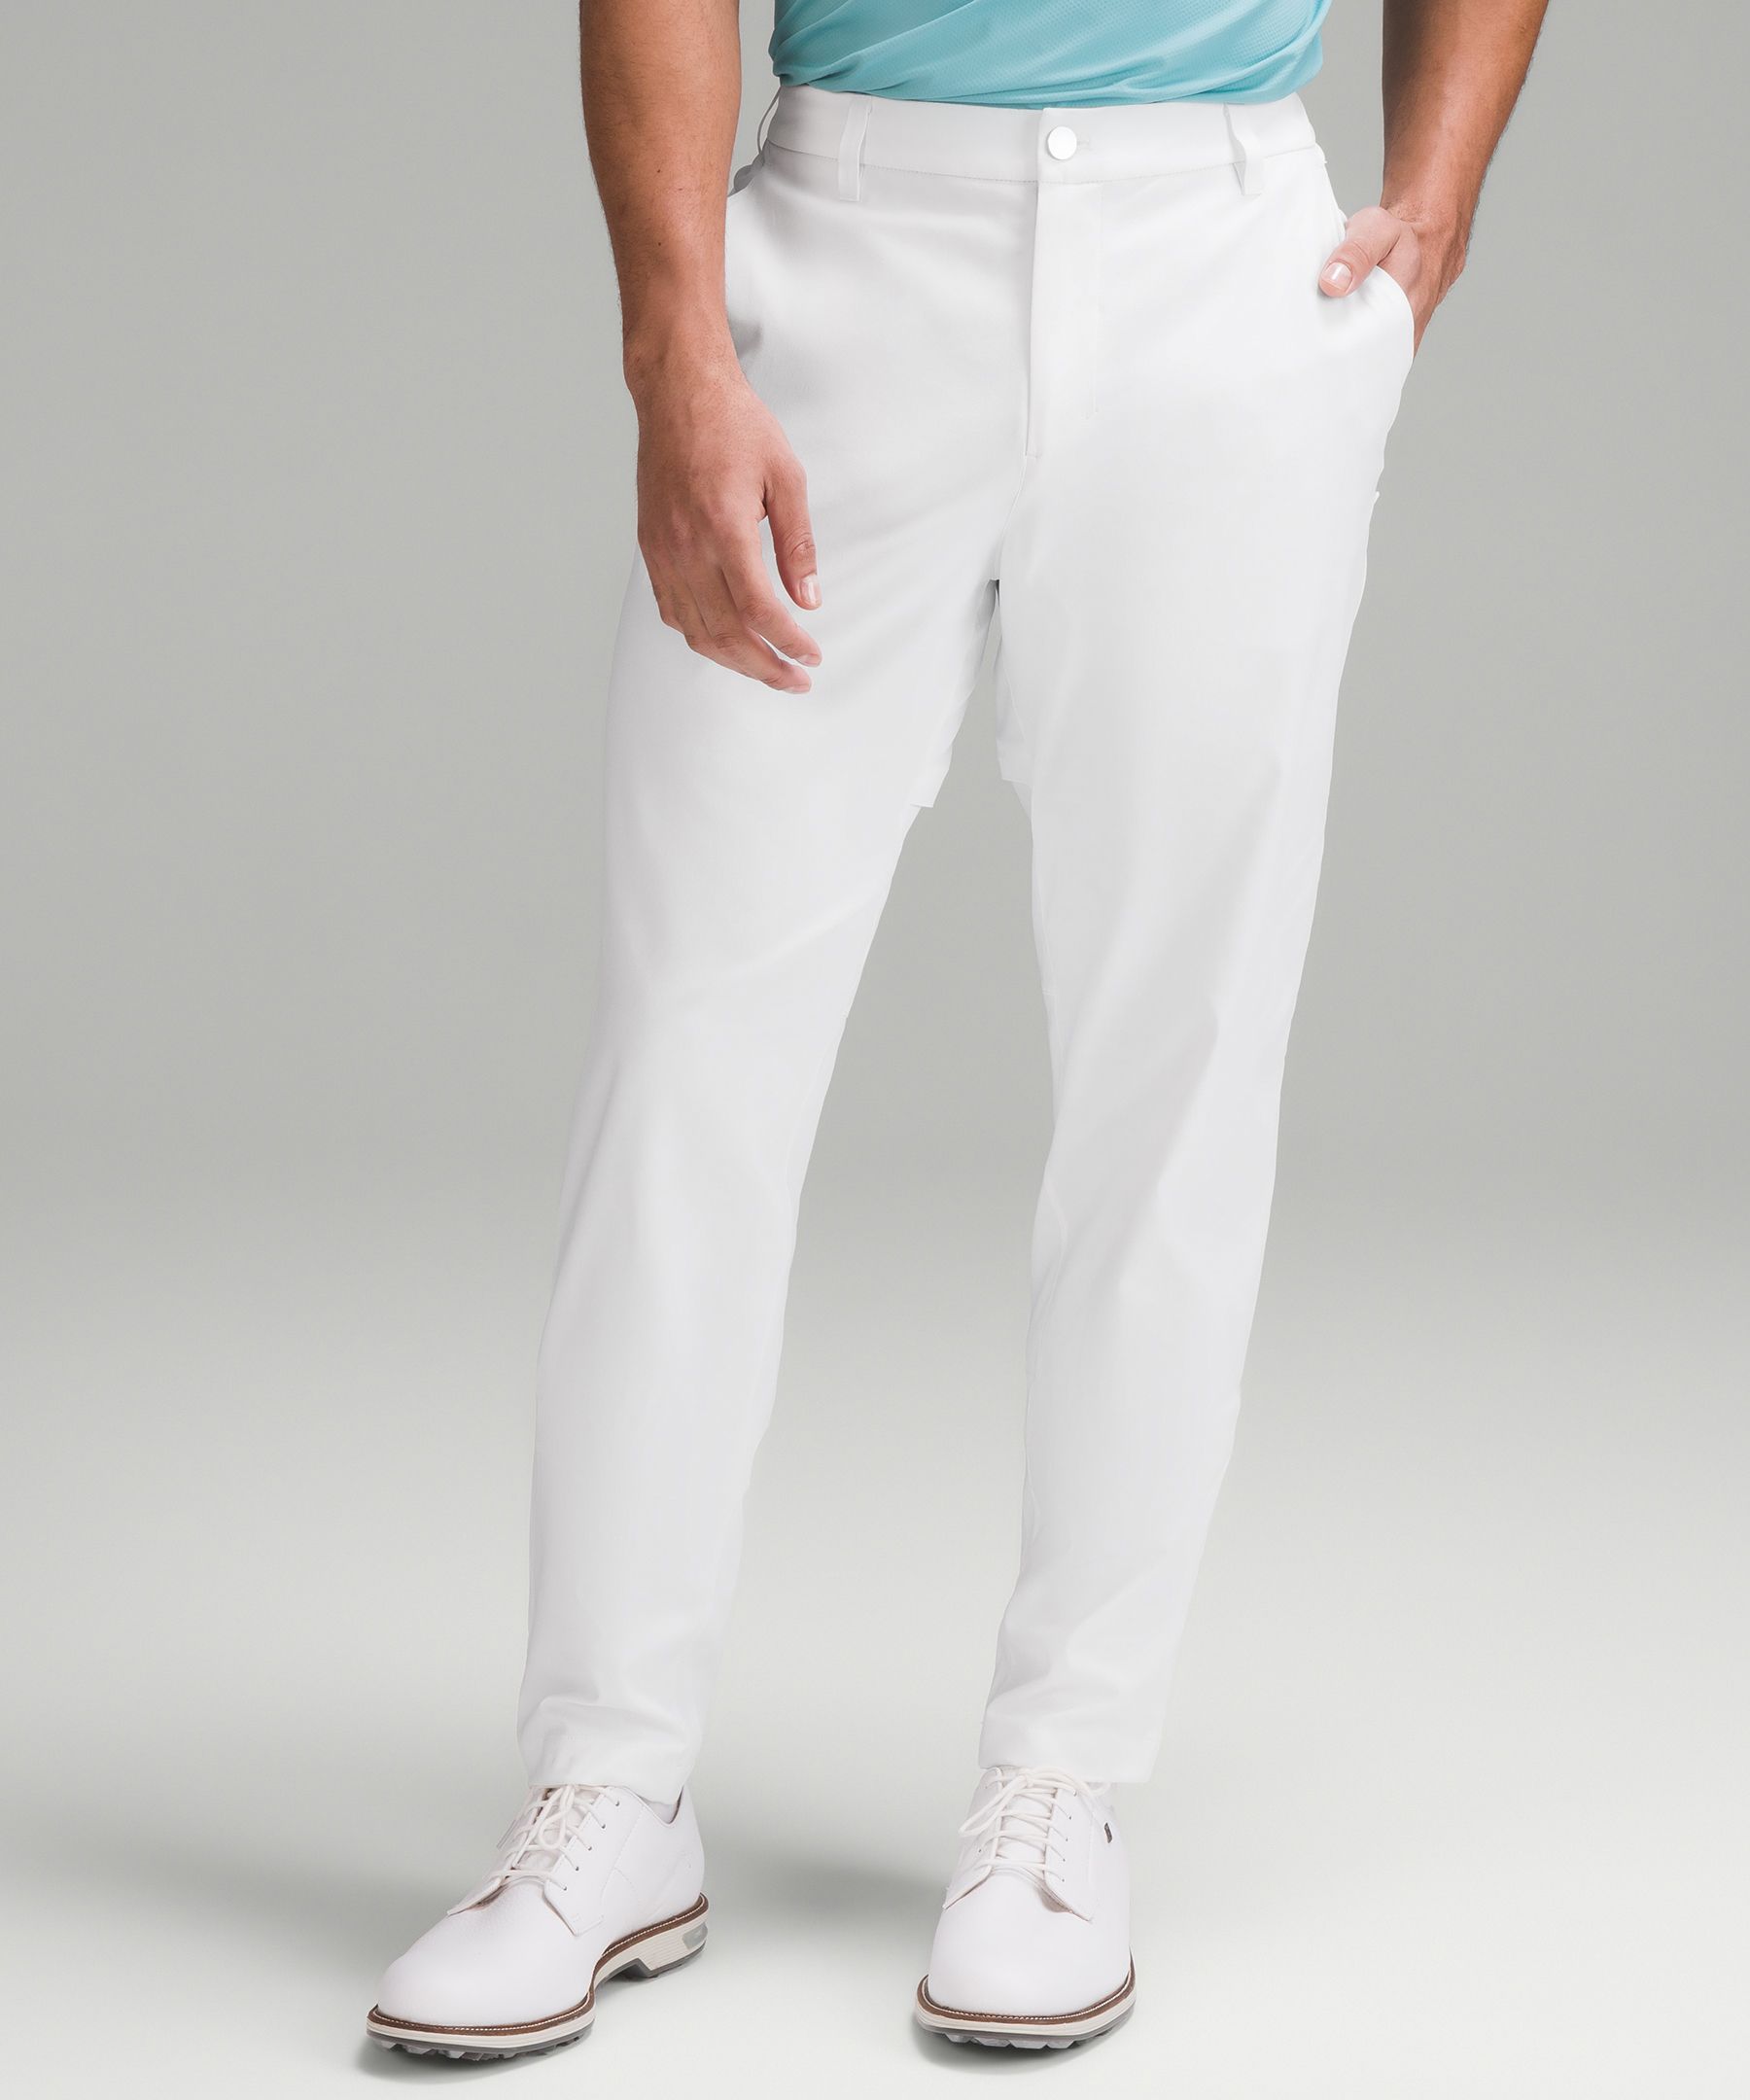 Commission Relaxed-Tapered Golf Pant 30, Men's Trousers